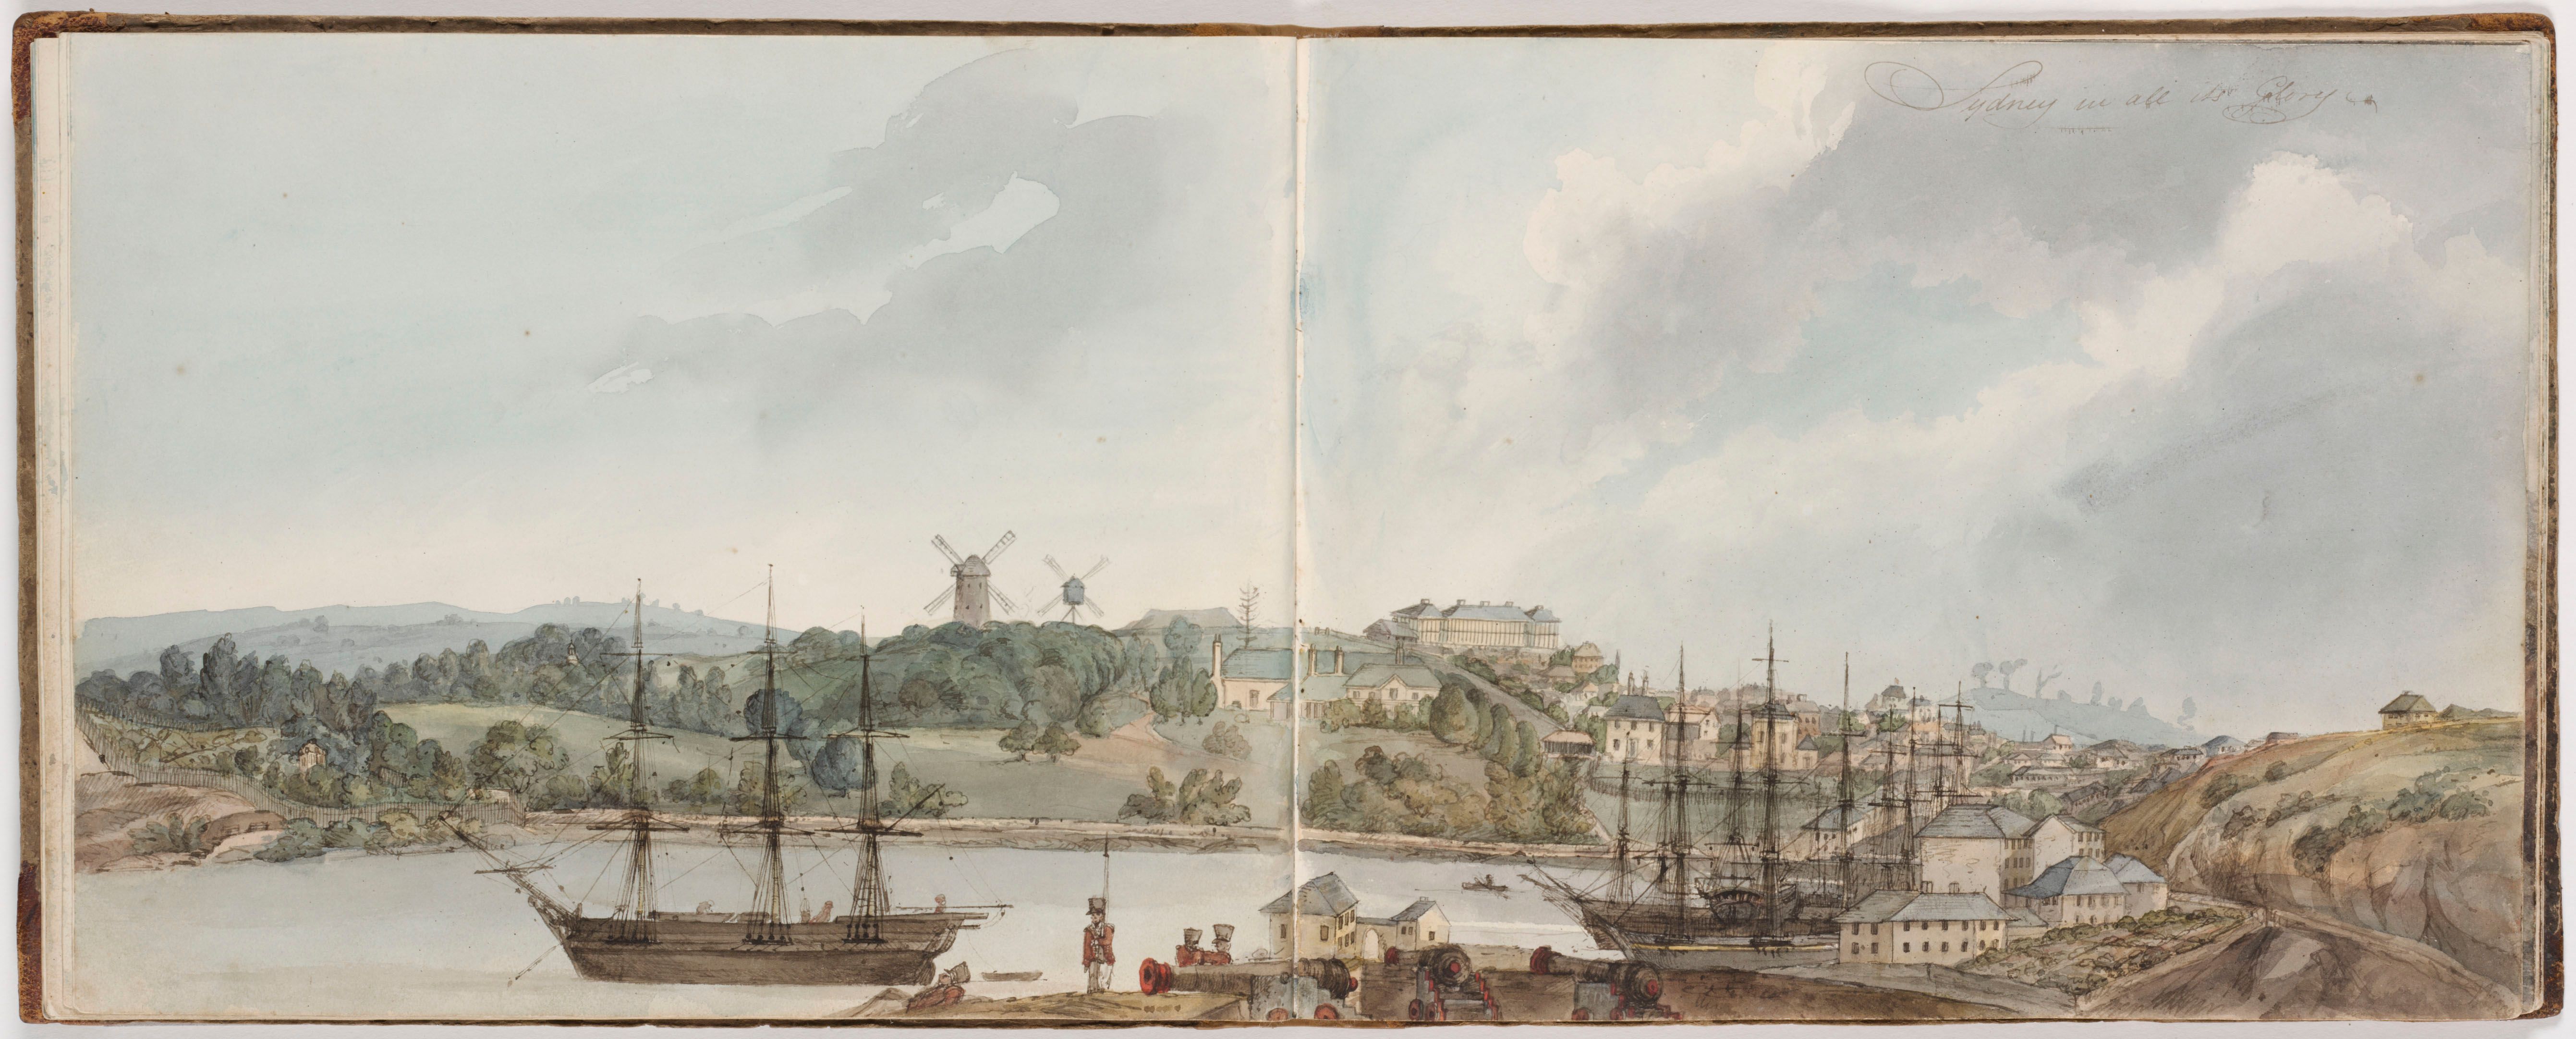 water colour painting in sketchbook showing sweeping views cross Sydney cove, past ships and water craft and docks through to the colonial town of sydeny and up to ridge beyond.